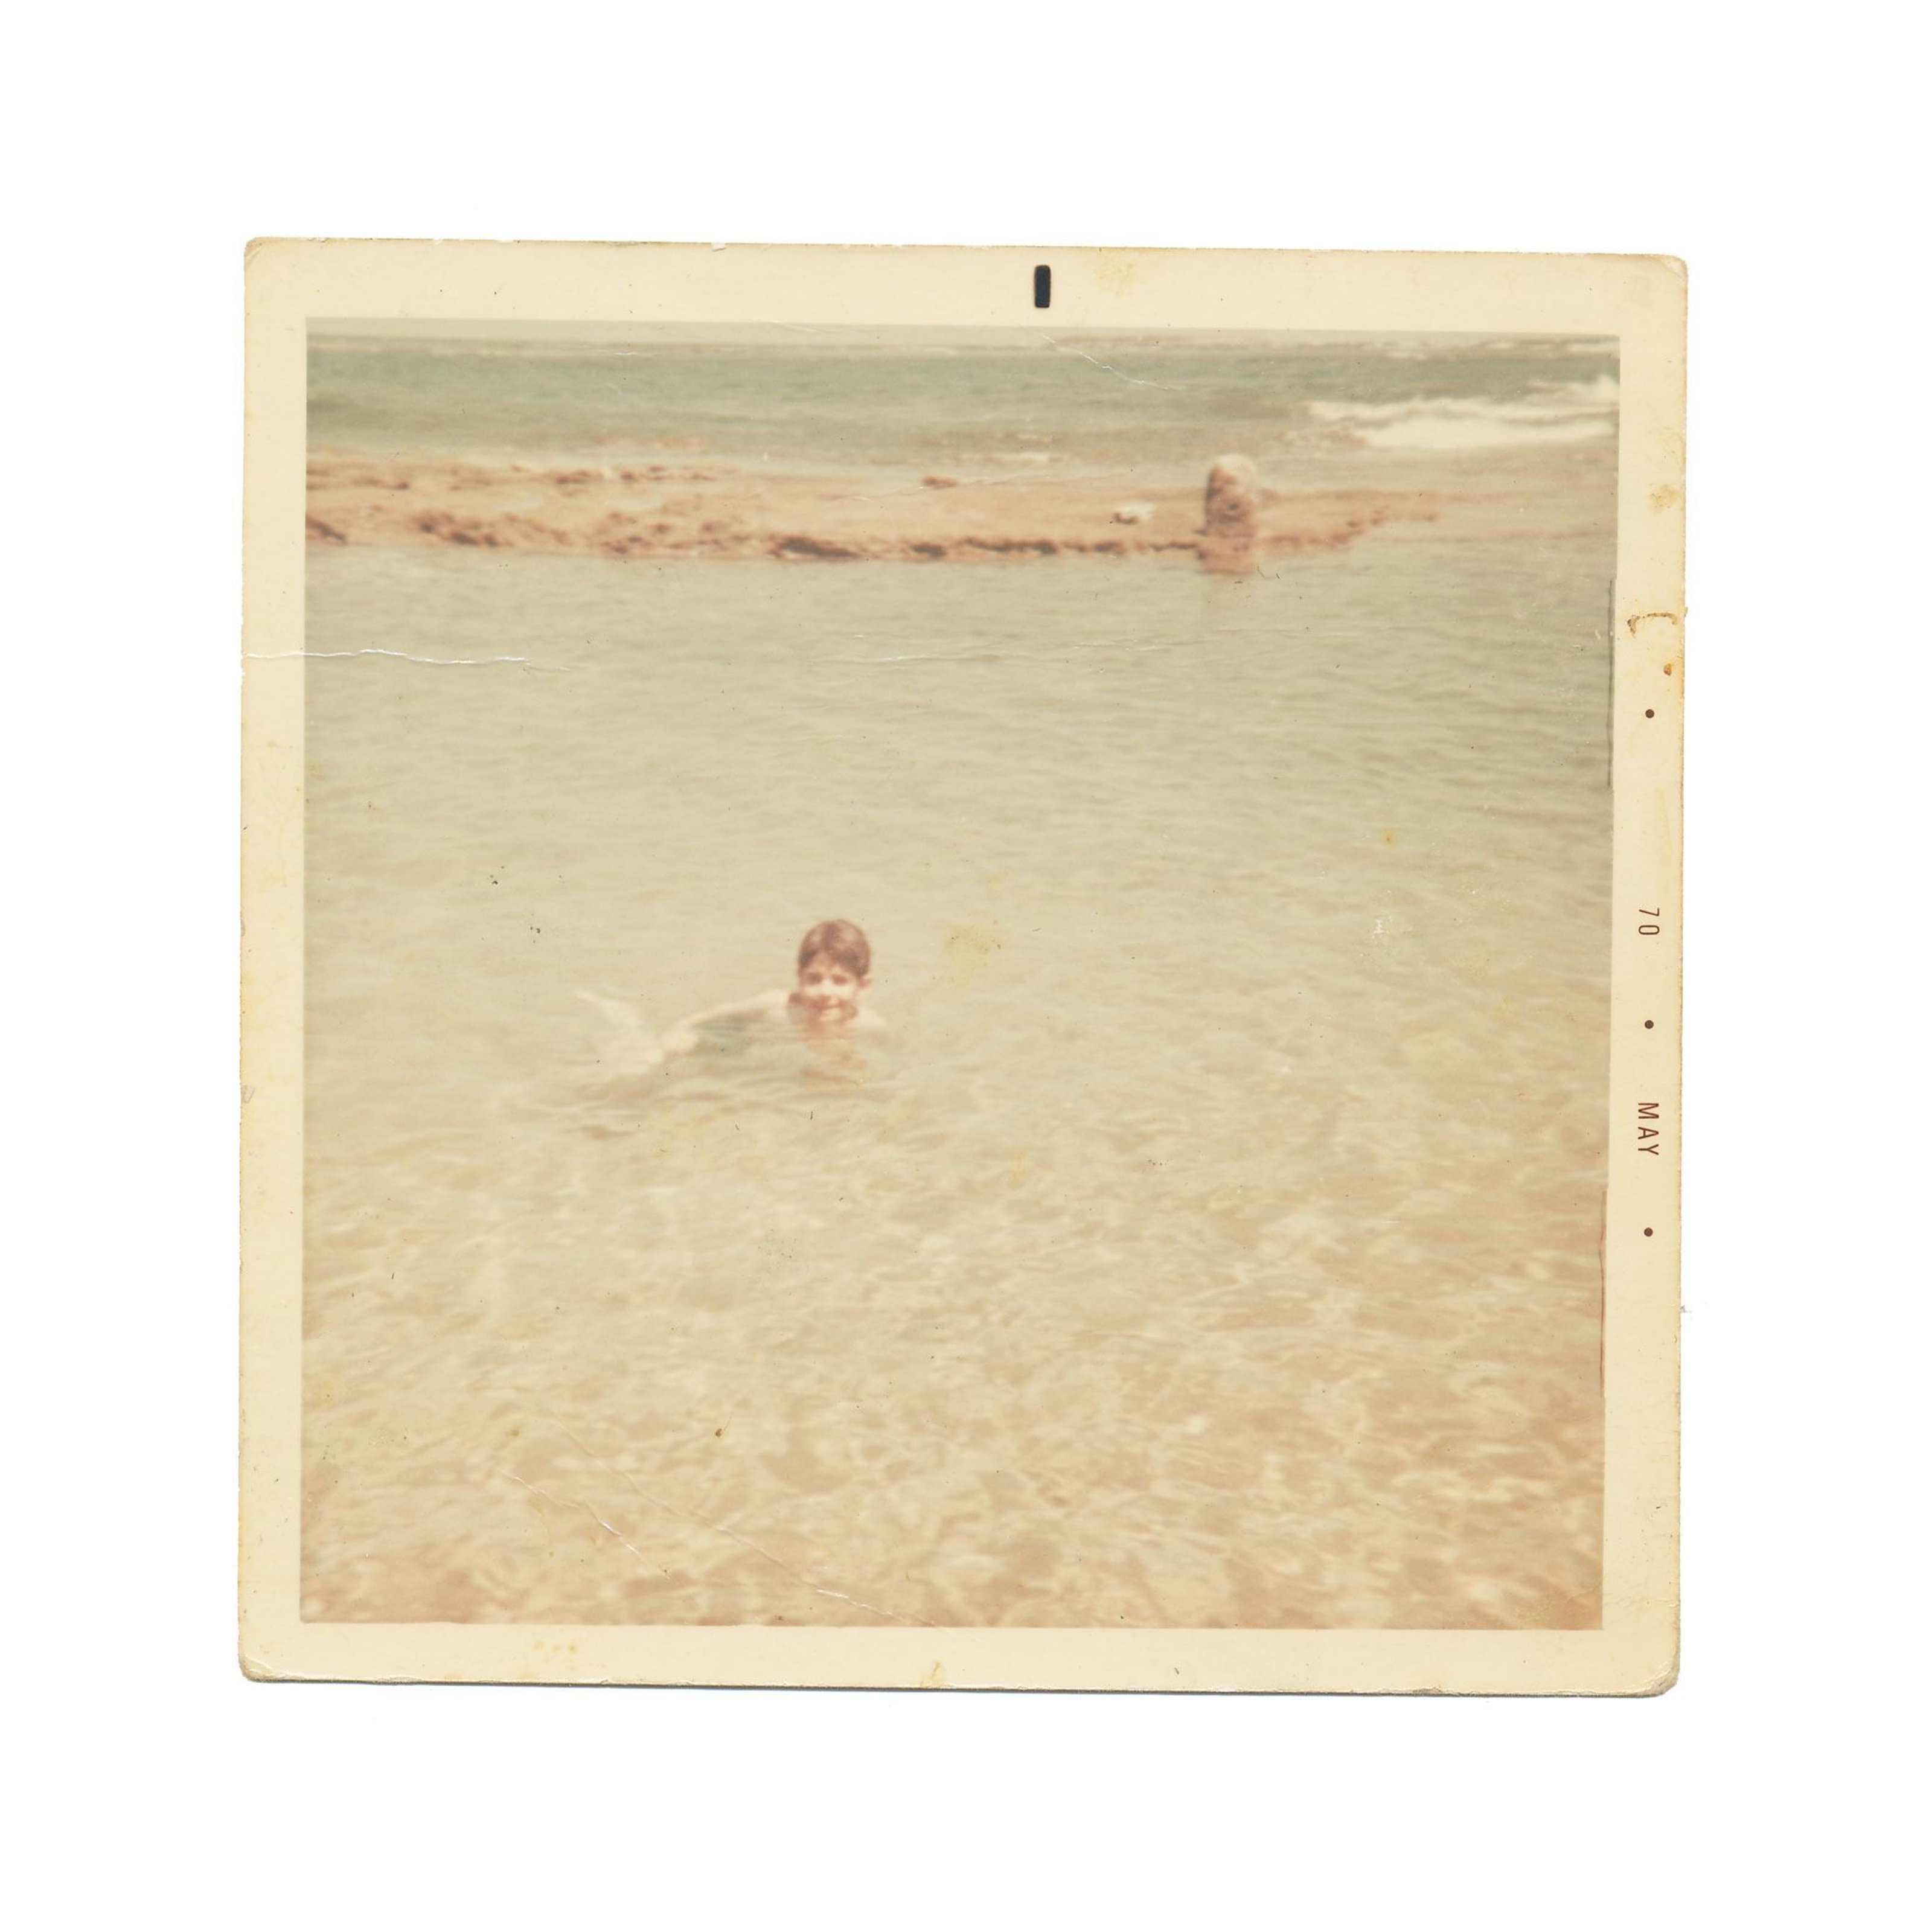 Félix González-Torres as a child, swimming in the sea.